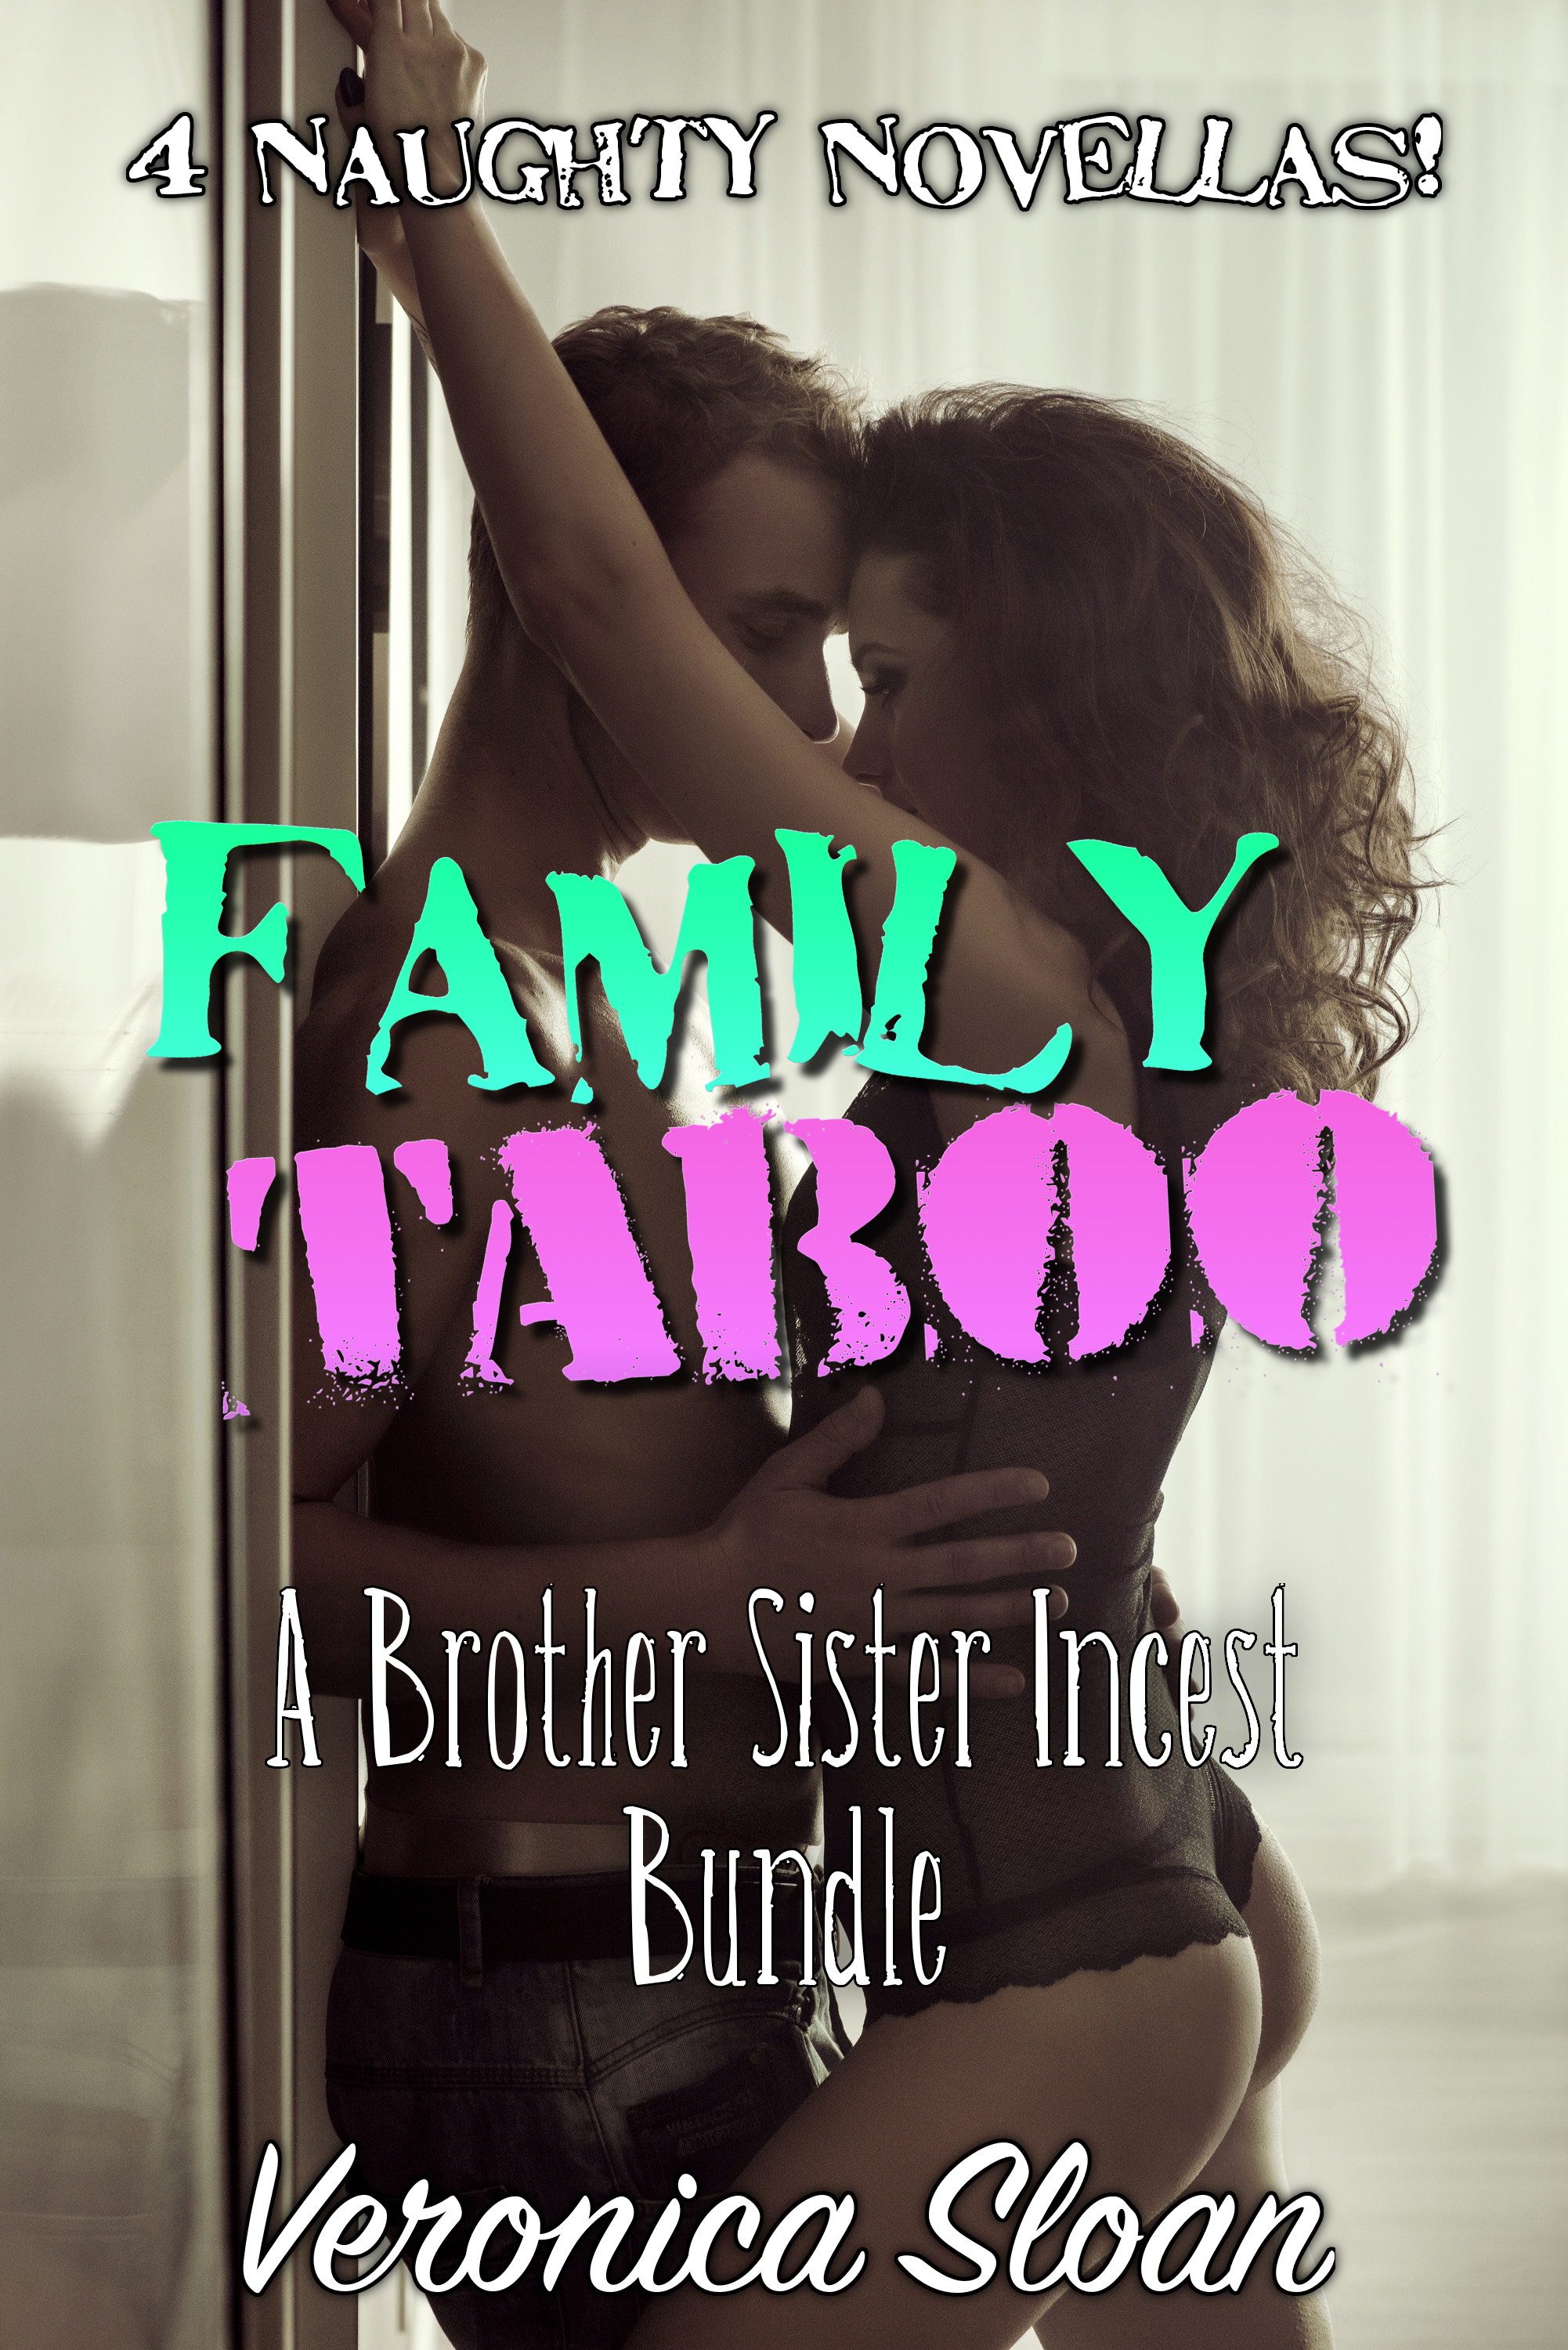 daria daniella recommends Brother Sister Insest Stories